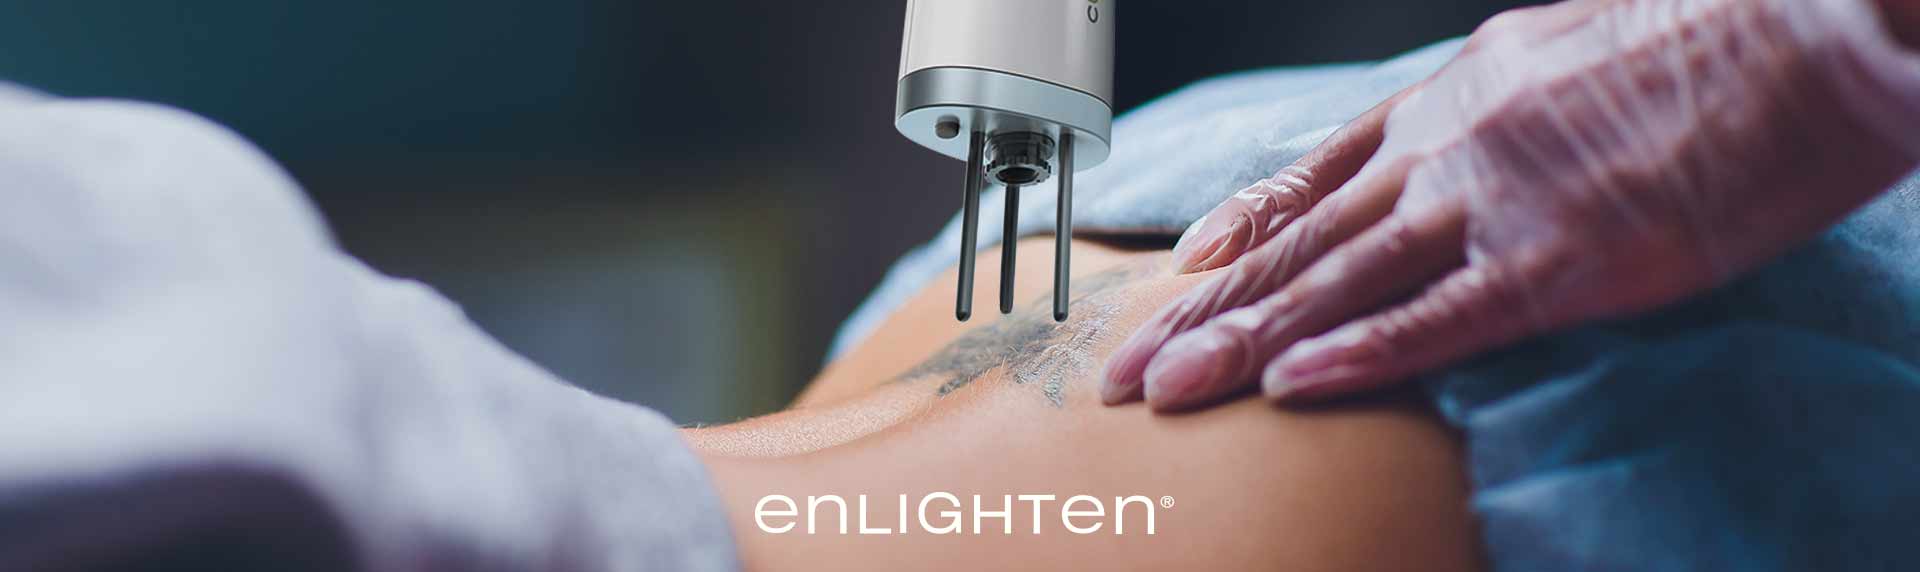 enlighten: How the Best Tattoo Removal Solution Became My Practice's  Workhorse | CUTERA